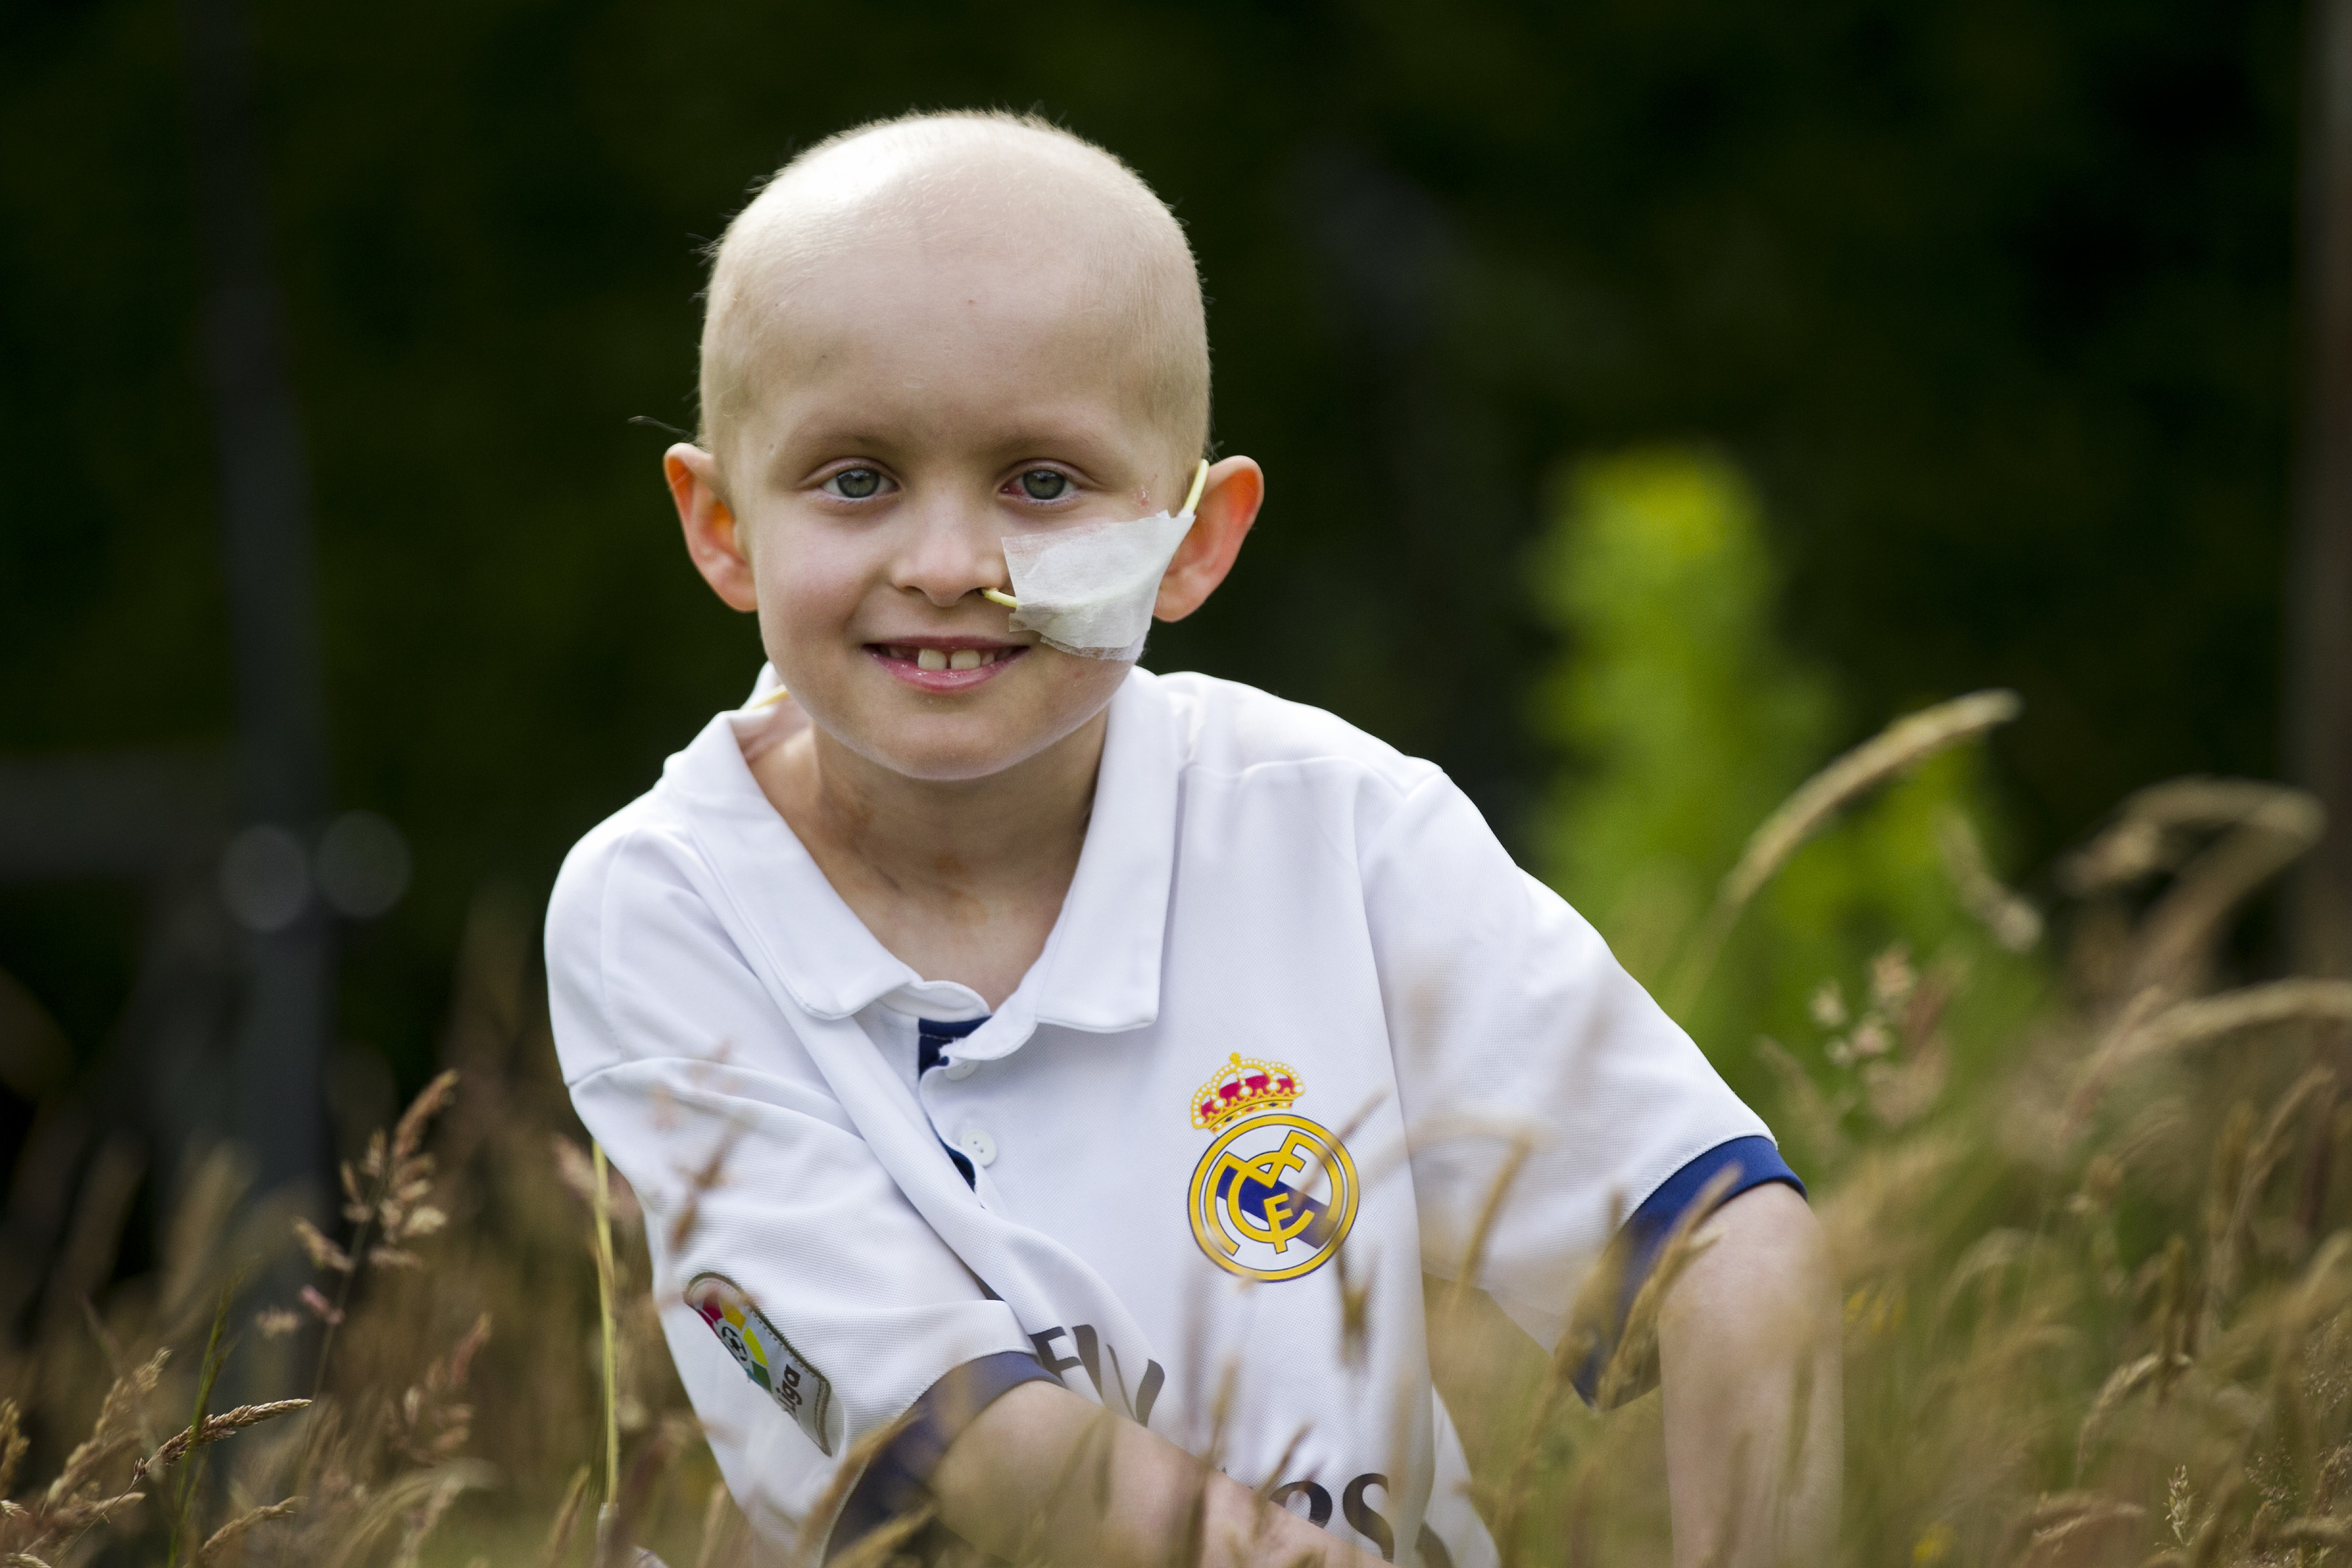 William is recovering from a brain tumour operation (Andrew Cawley / DC Thomson)